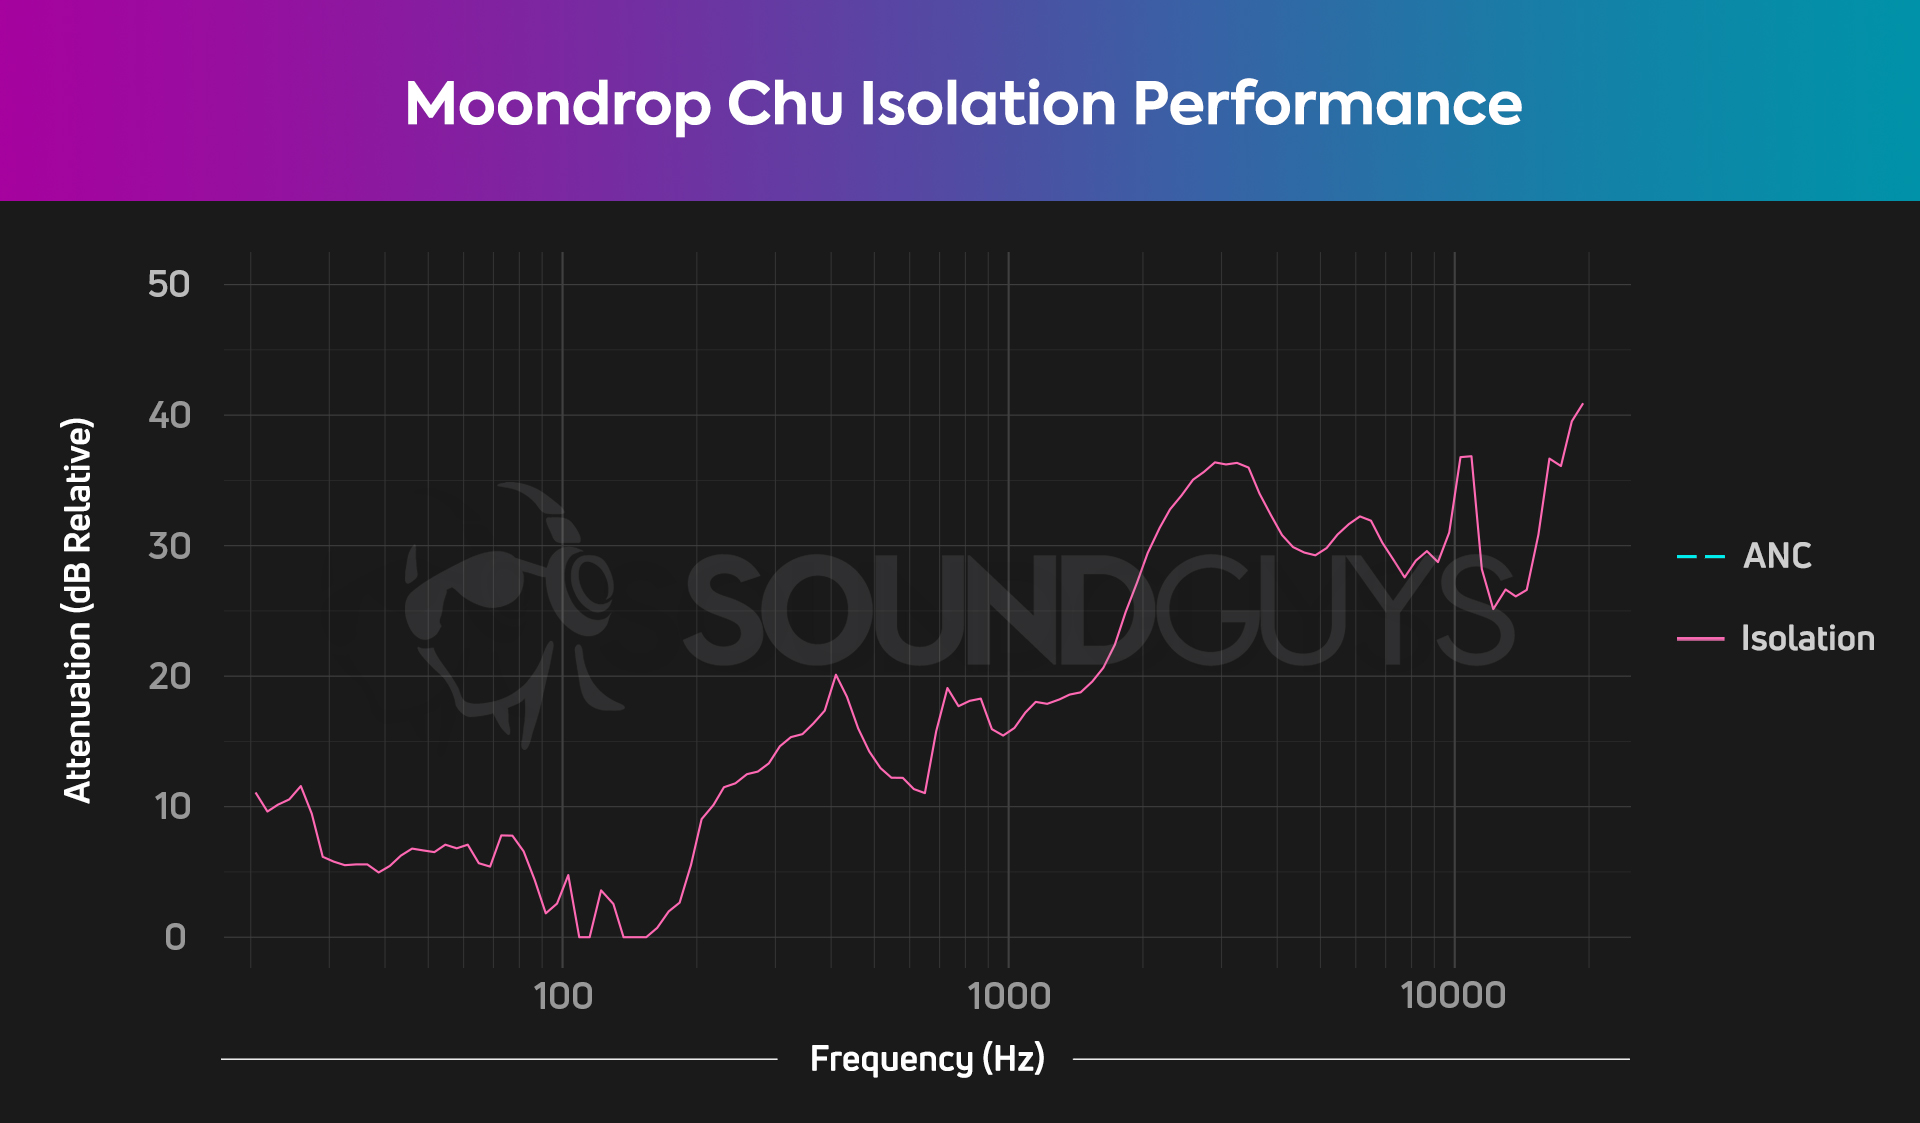 Chart illustrates the isolating properties of the Moondrop Chu, which manage to block some mids and lows in addition to highs.